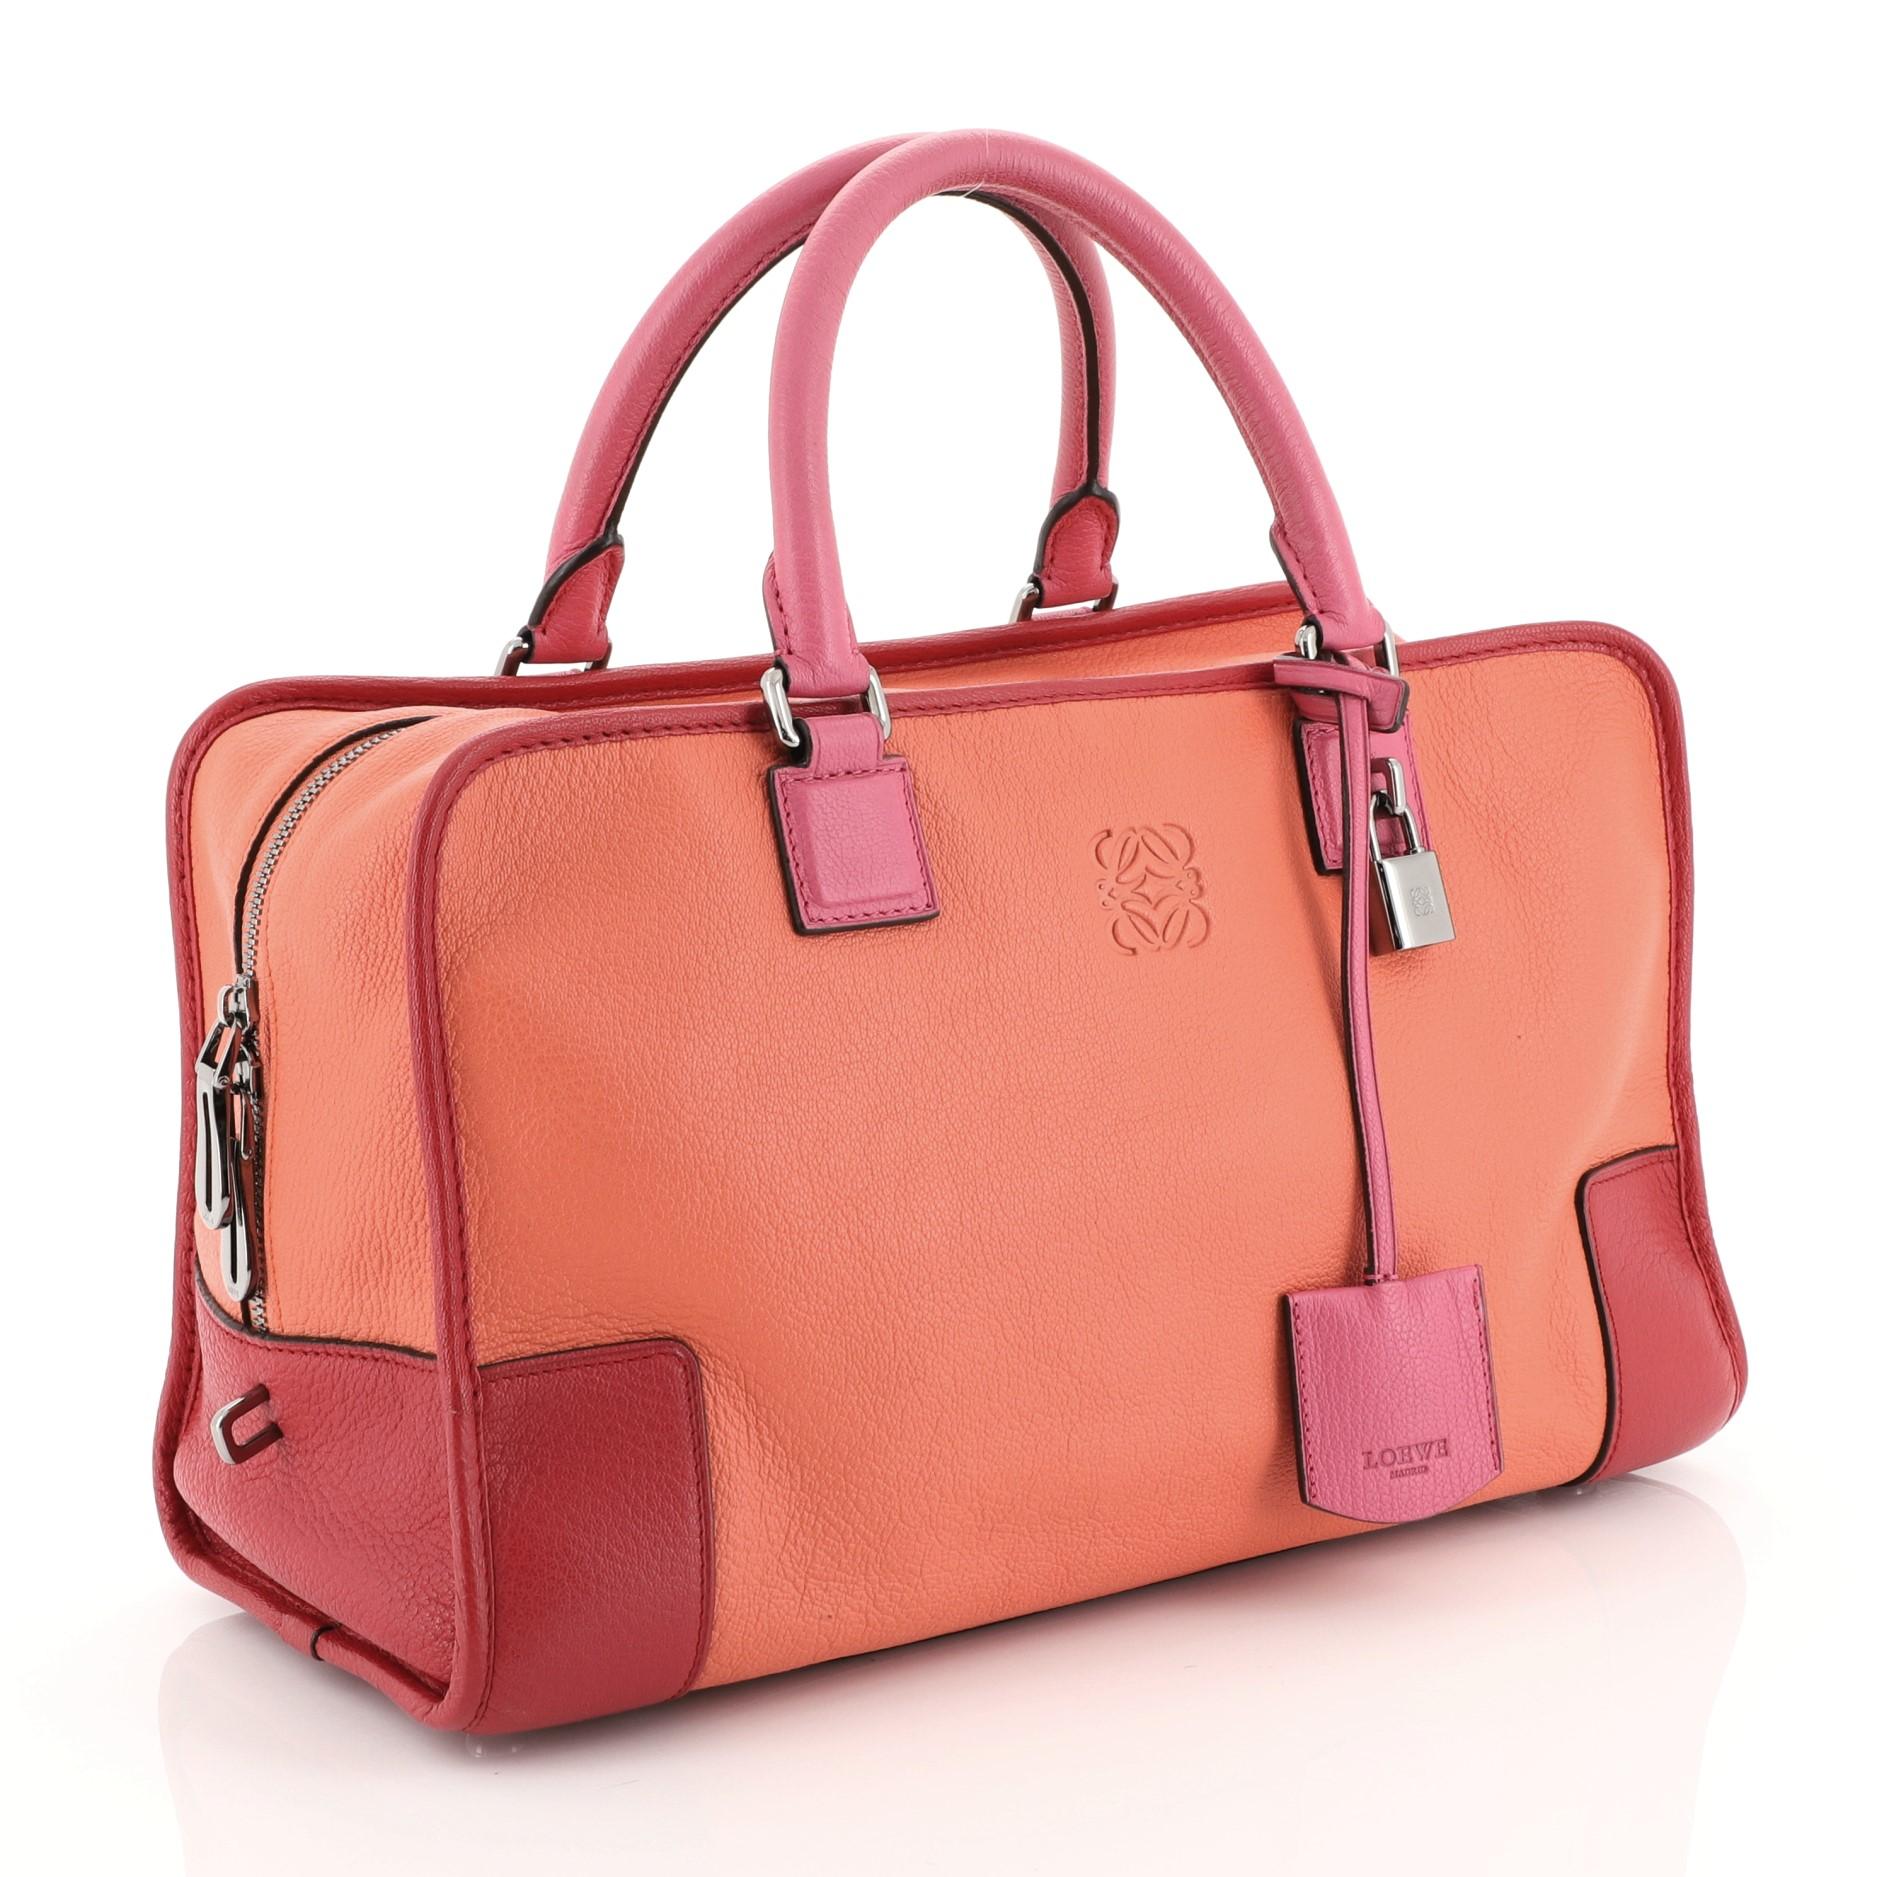 This Loewe Amazona Bag Leather 36, crafted in orange, red and pink leather, features dual rolled leather handles, embossed logo at front, and silver-tone hardware. Its zip closure opens to an orange leather interior with zip and slip pockets.